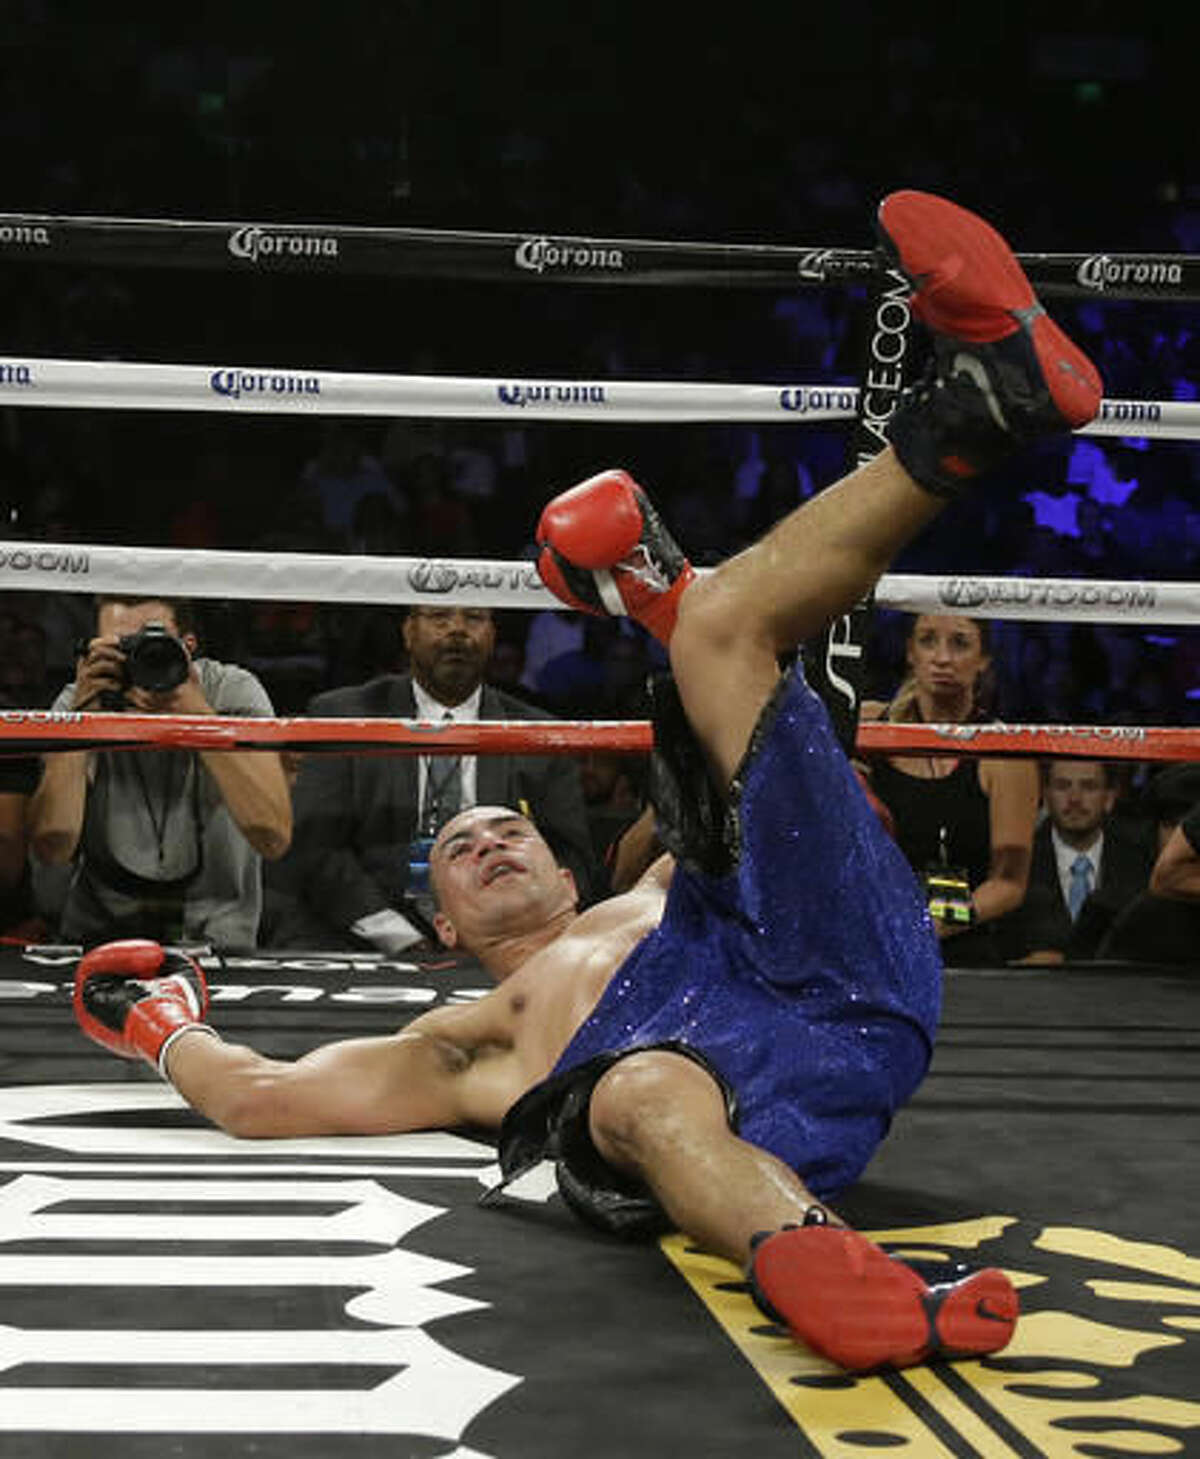 Alexander Brand goes tumbling to the mat during the ninth round of his light heavyweight boxing match against Andre Ward on Saturday, Aug. 6, 2016, in Oakland, Calif. Ward won the fight in a unanimous decision. (AP Photo/Eric Risberg)